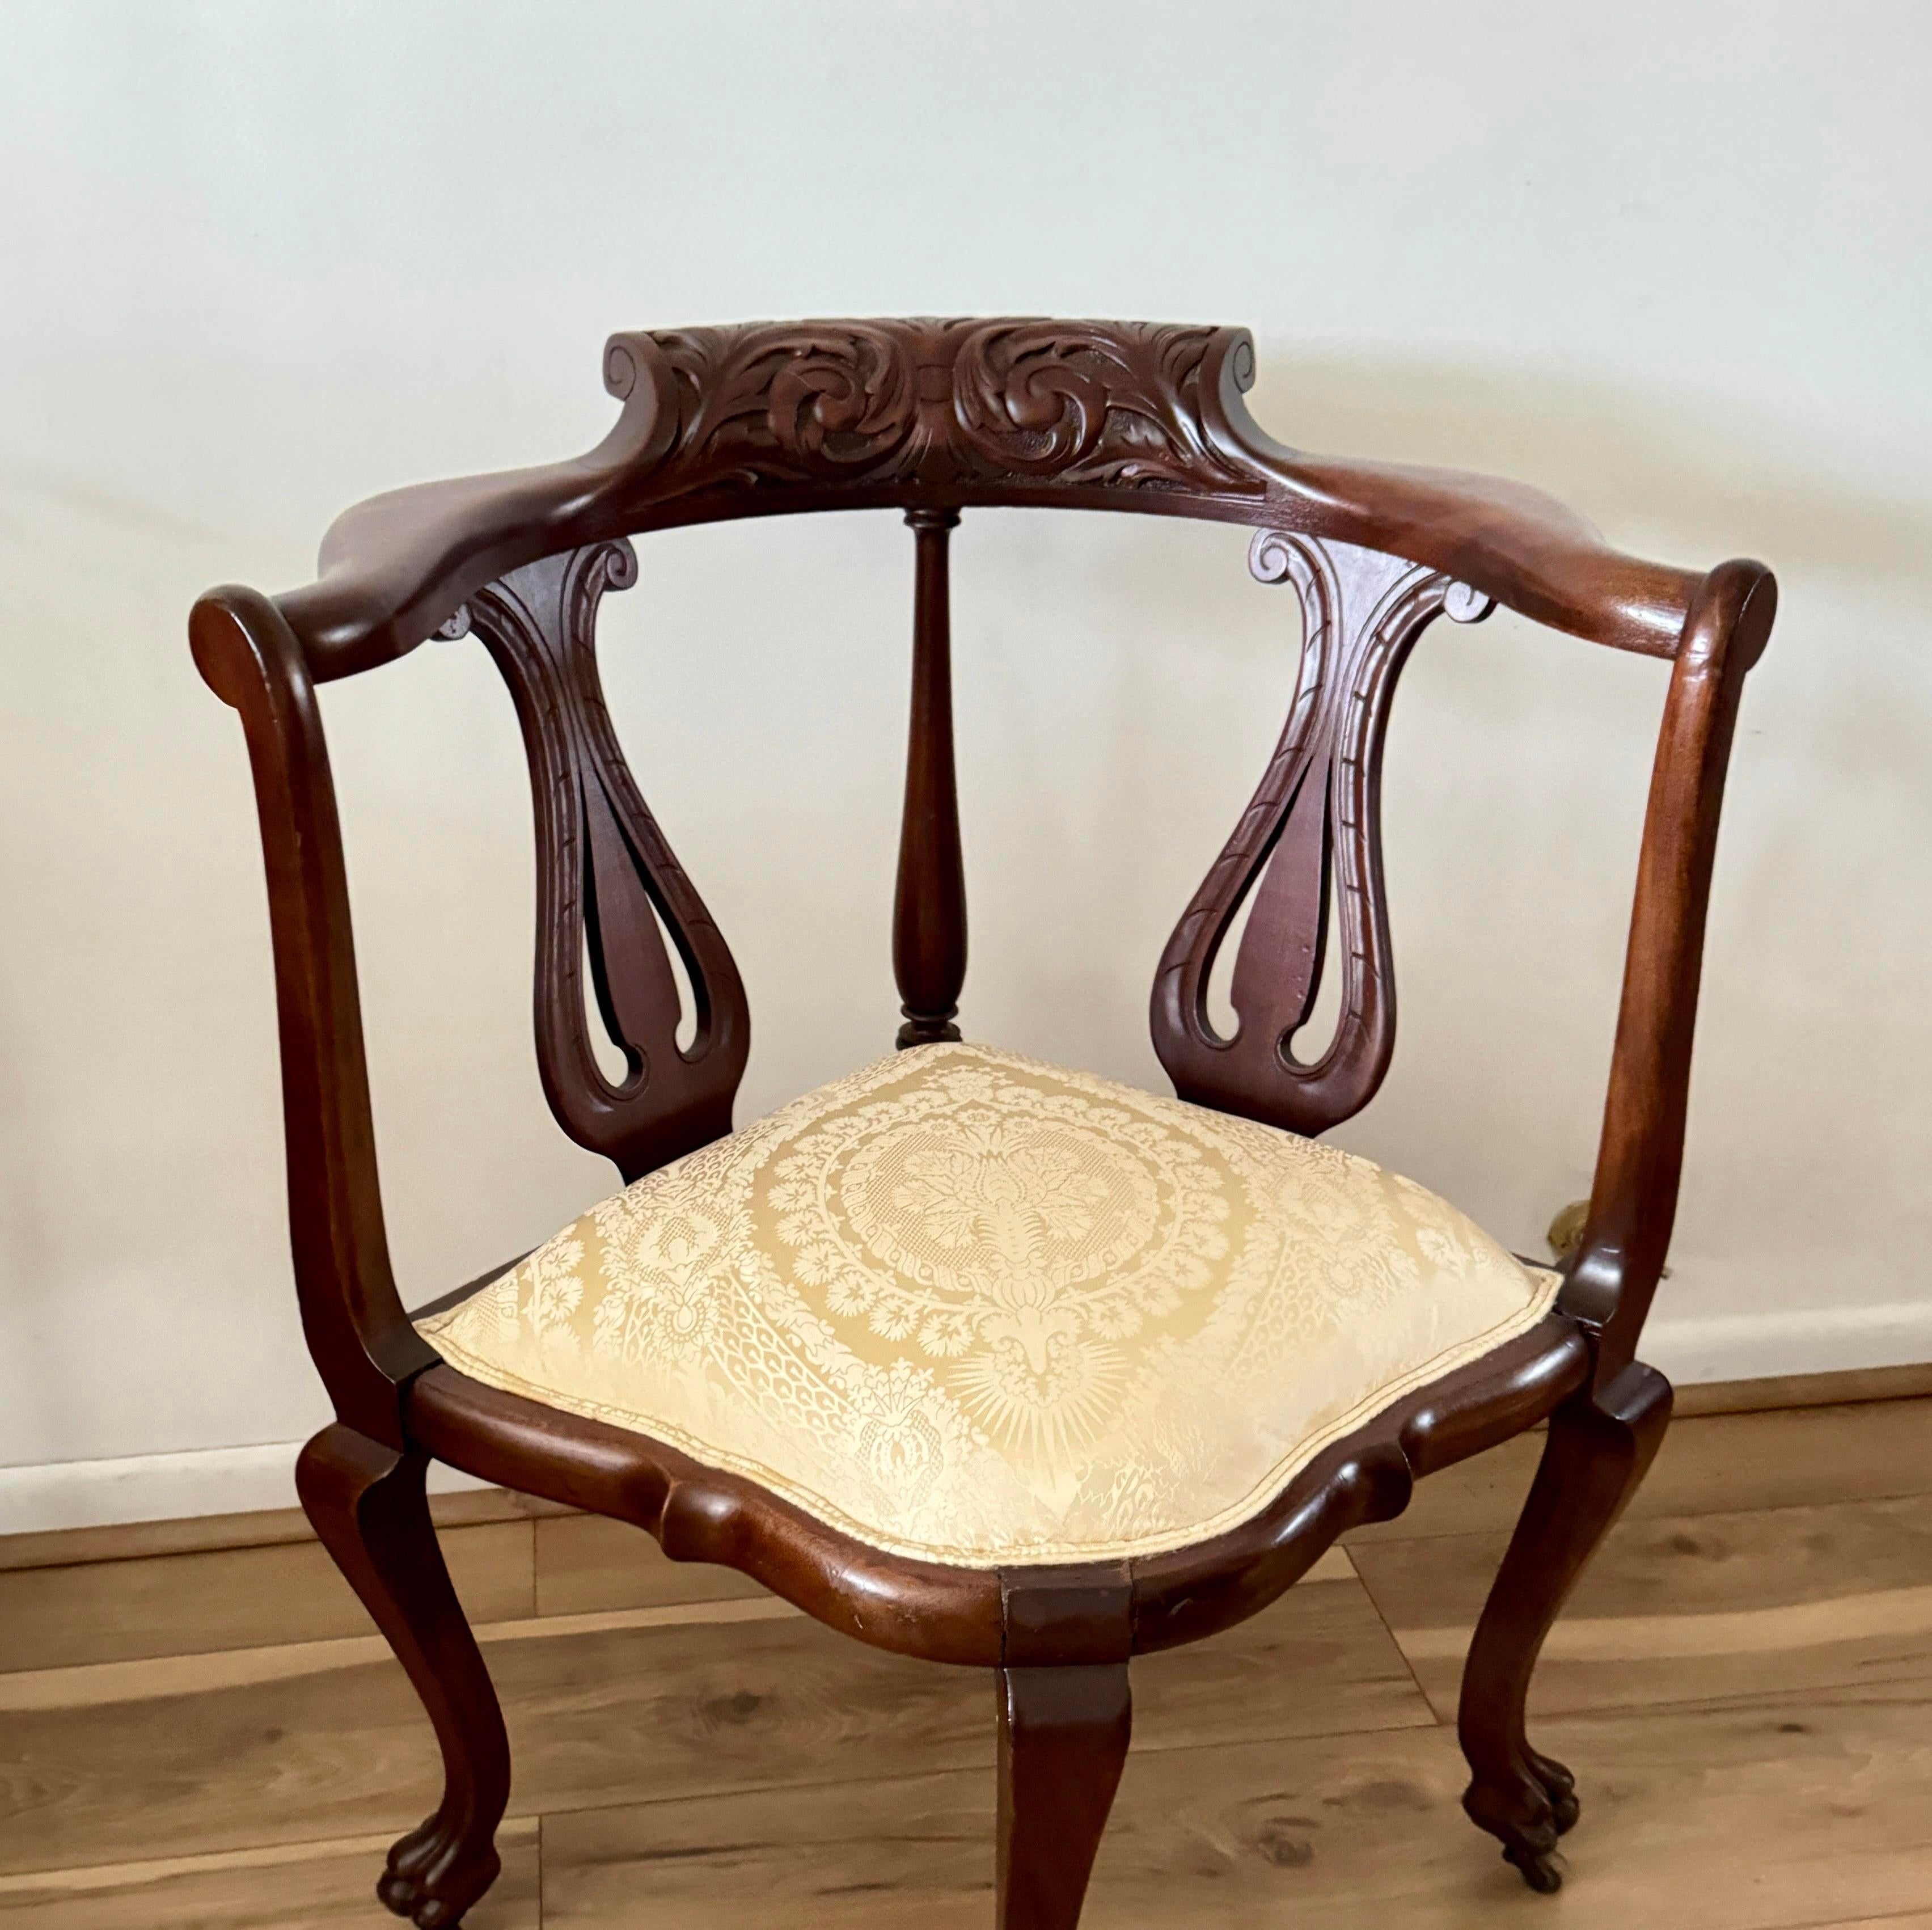 This exquisite piece showcases meticulous craftsmanship with its beautiful carved details, seamlessly blending the sophistication of Chippendale design with the warmth of rich mahogany wood. The chair's intricate carvings add a touch of opulence,